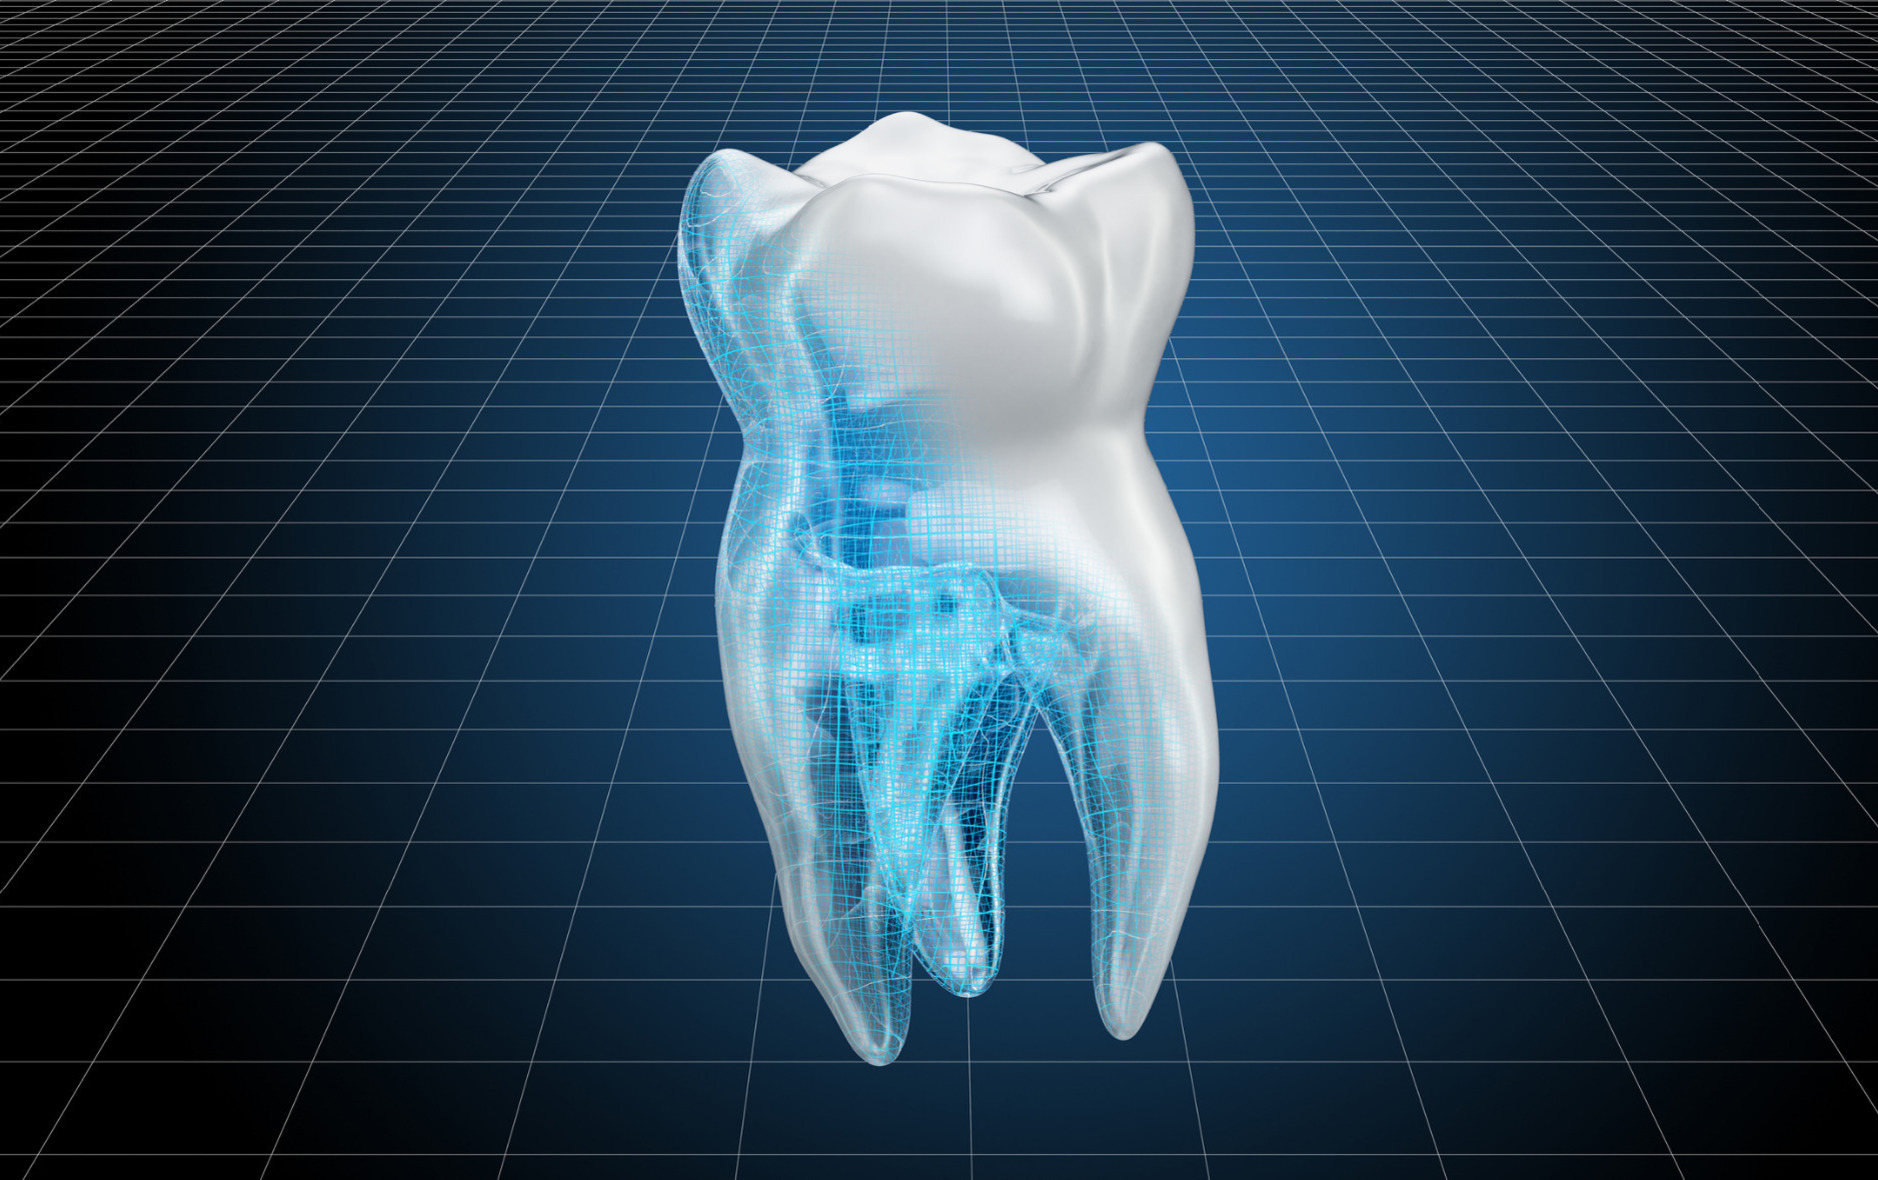 Cad image of a tooth